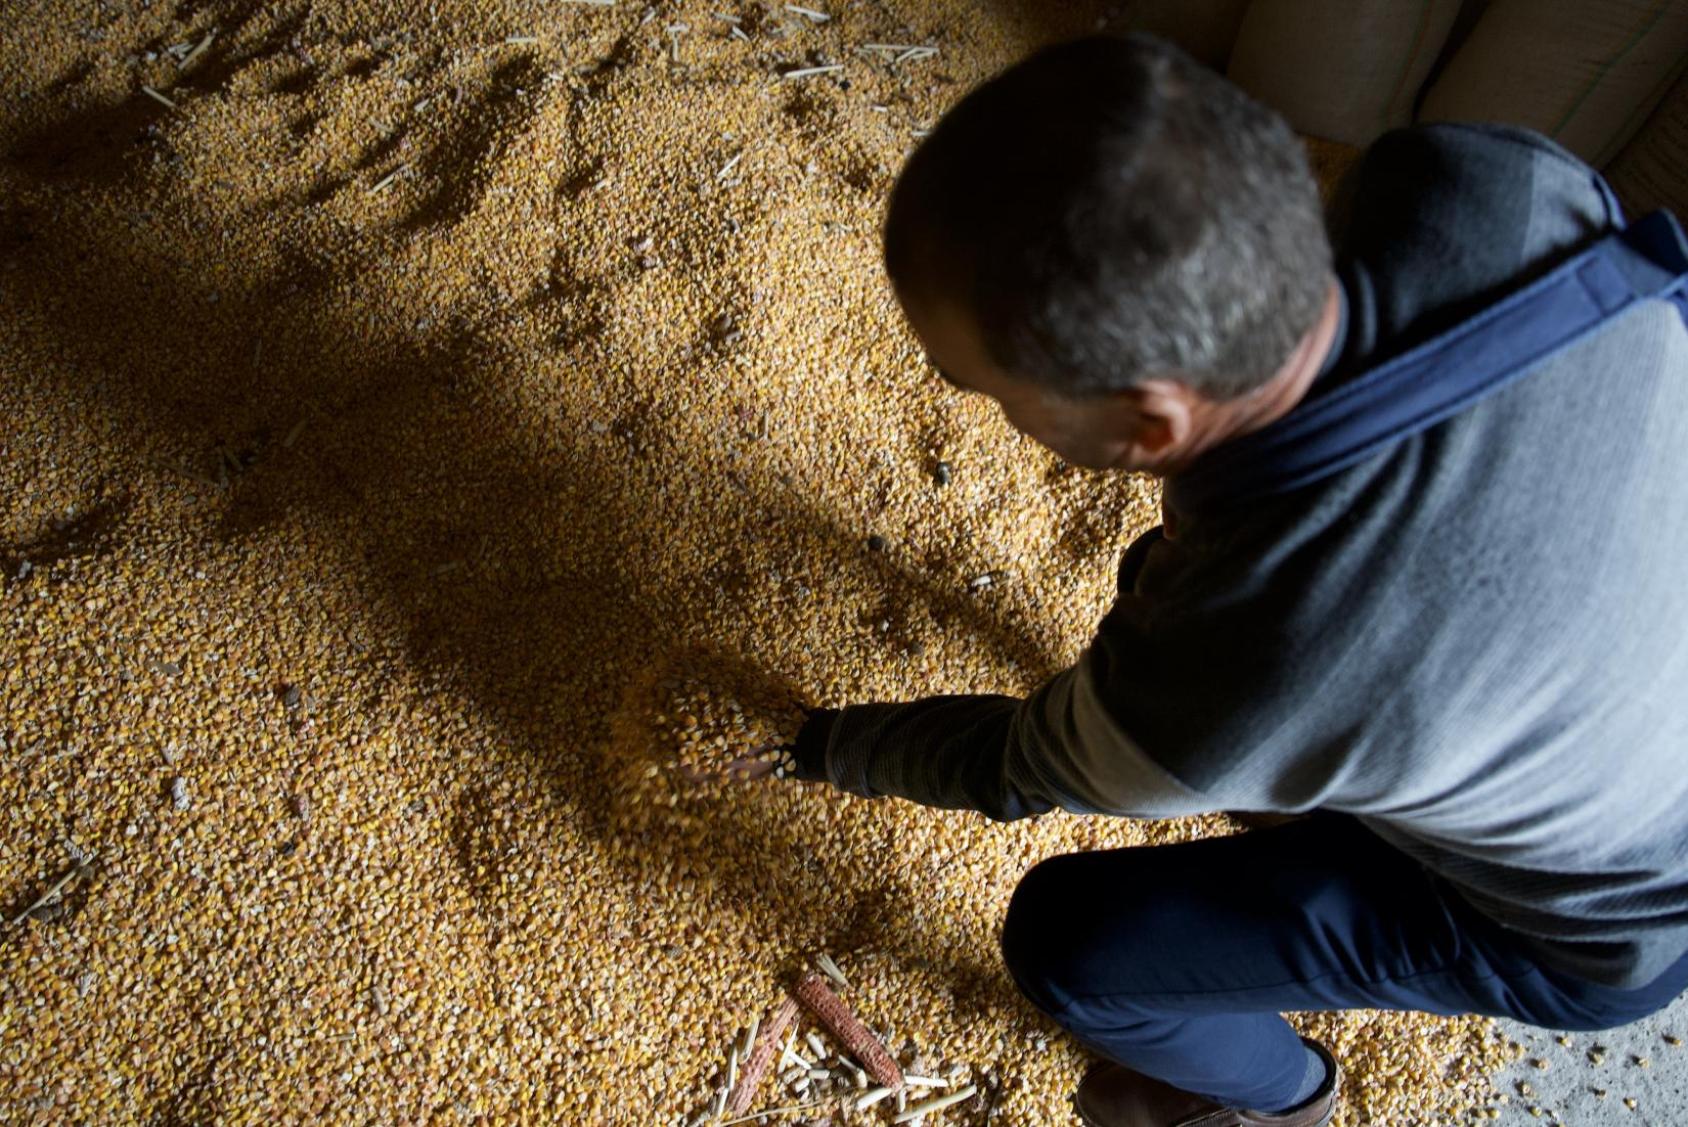 A man on a blue shirt and blue cast crouches over seeds in a grain barn 